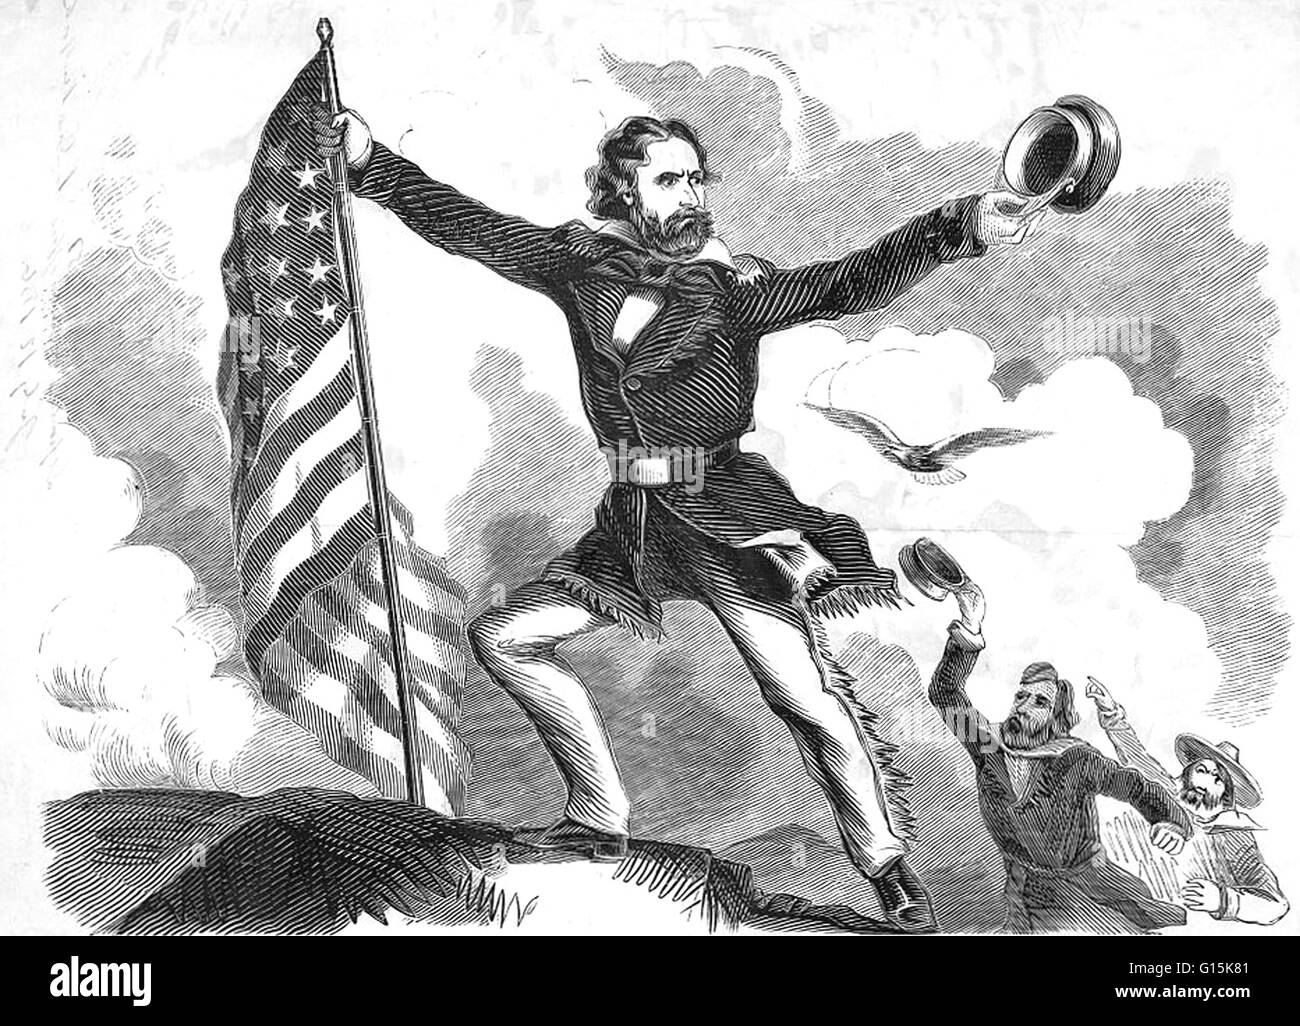 Engraving entitled: Col. Fremont planting the American standard on the Rocky Mountains. Fremont is shown on a mountain peak, planting an American flag. He is clad in fringed trousers and military coat and waves a visored cap in the air. Below are a bearde Stock Photo